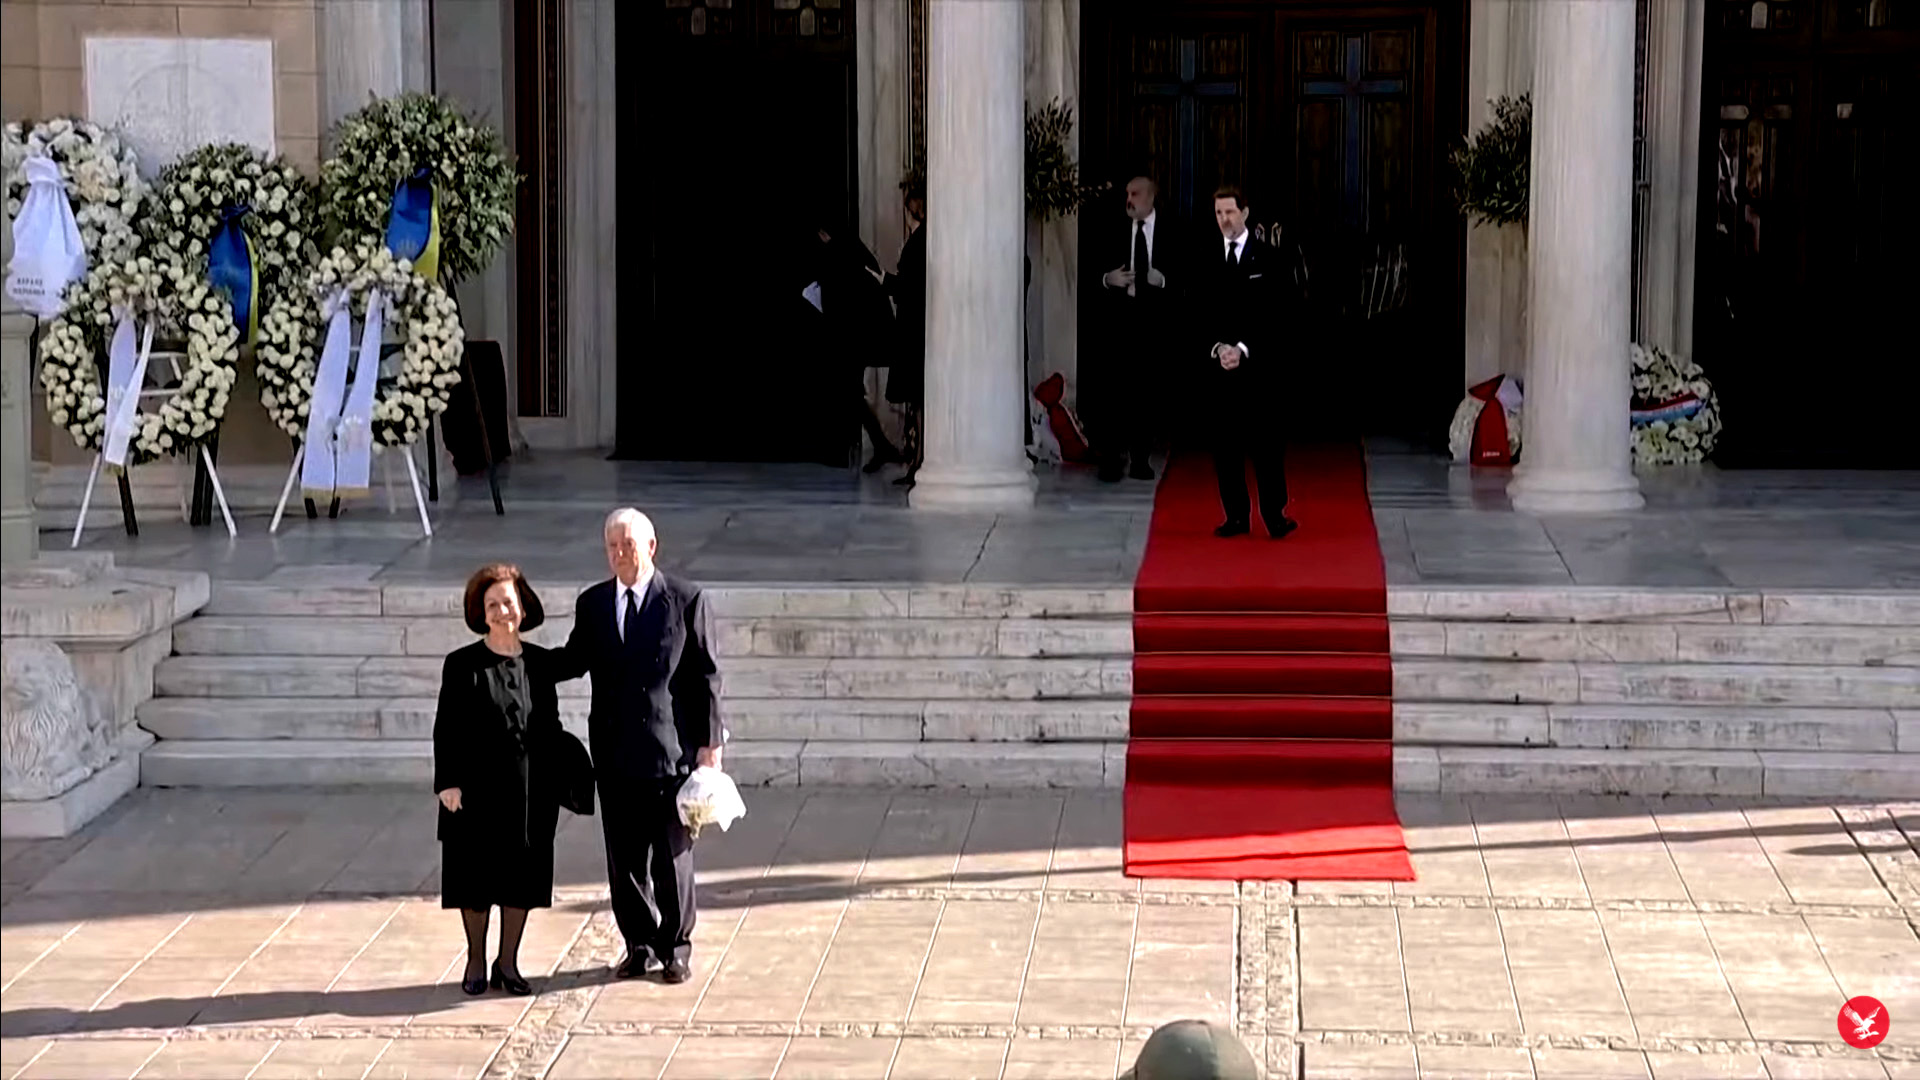 SERBIAN ROYAL COUPLE AT THE FUNERAL OF KING CONSTANTINE II OF GREECE SOURCE The Independent screenshot